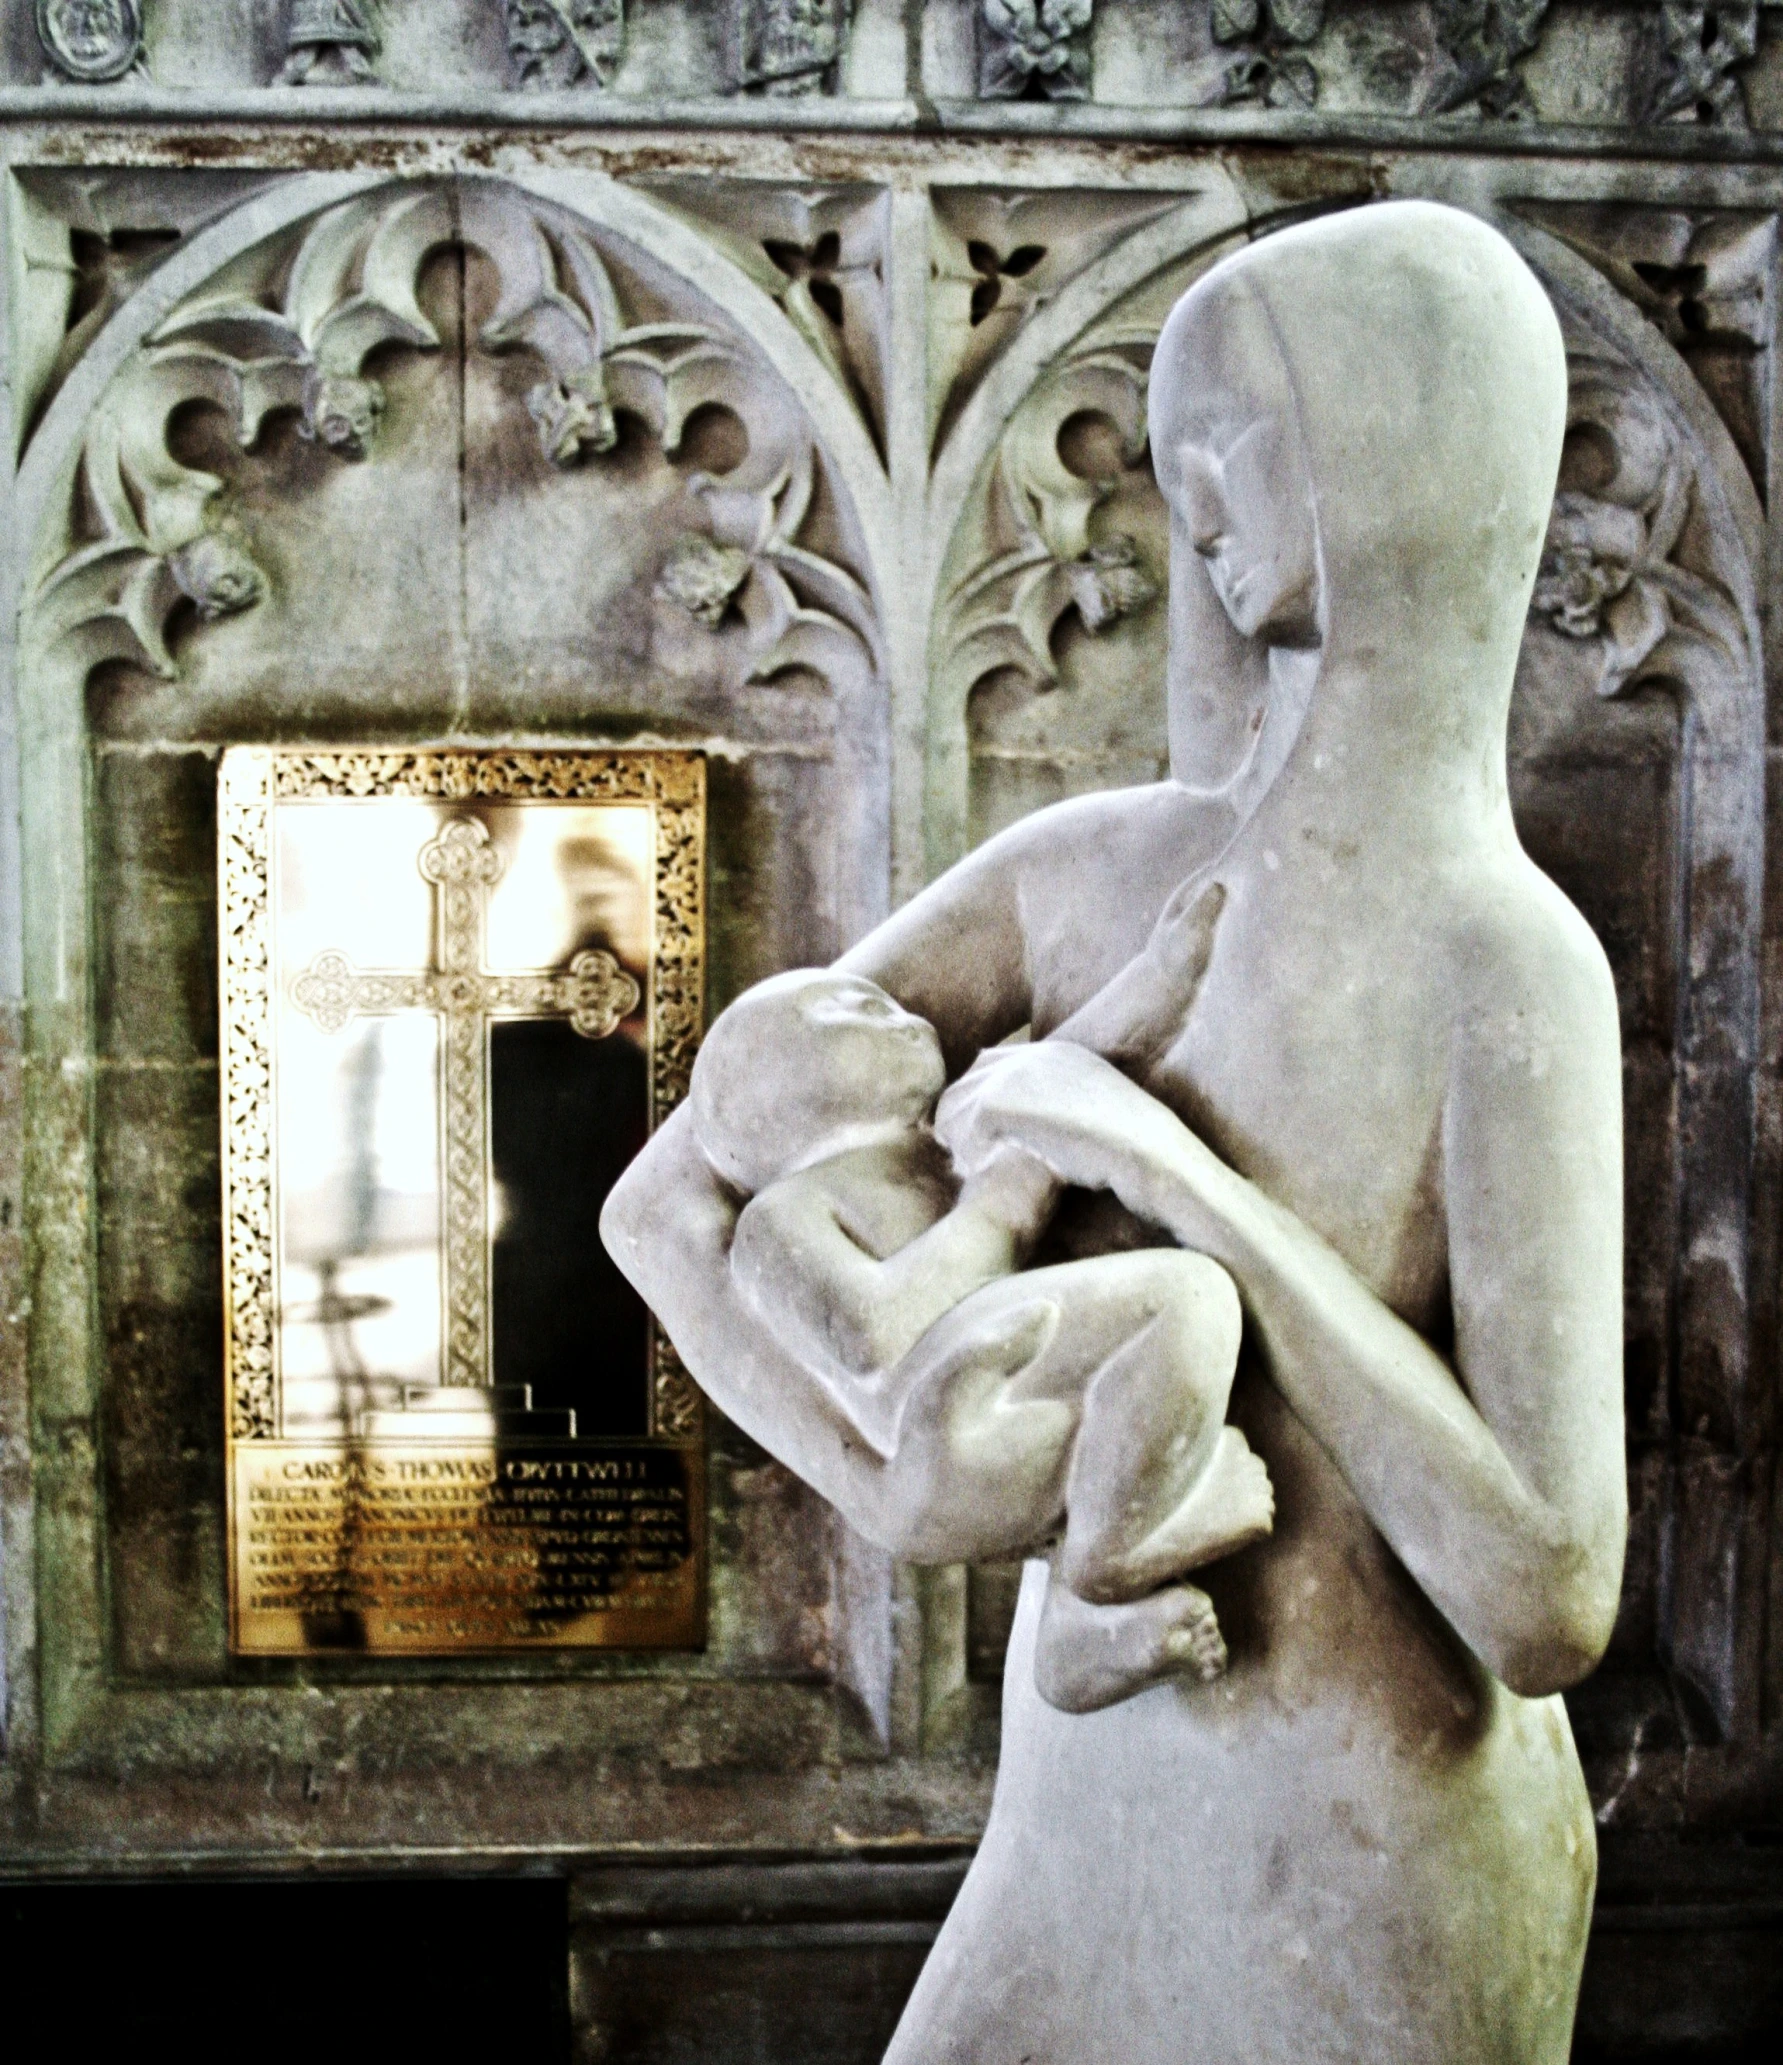 a statue in the shape of a woman holding a baby